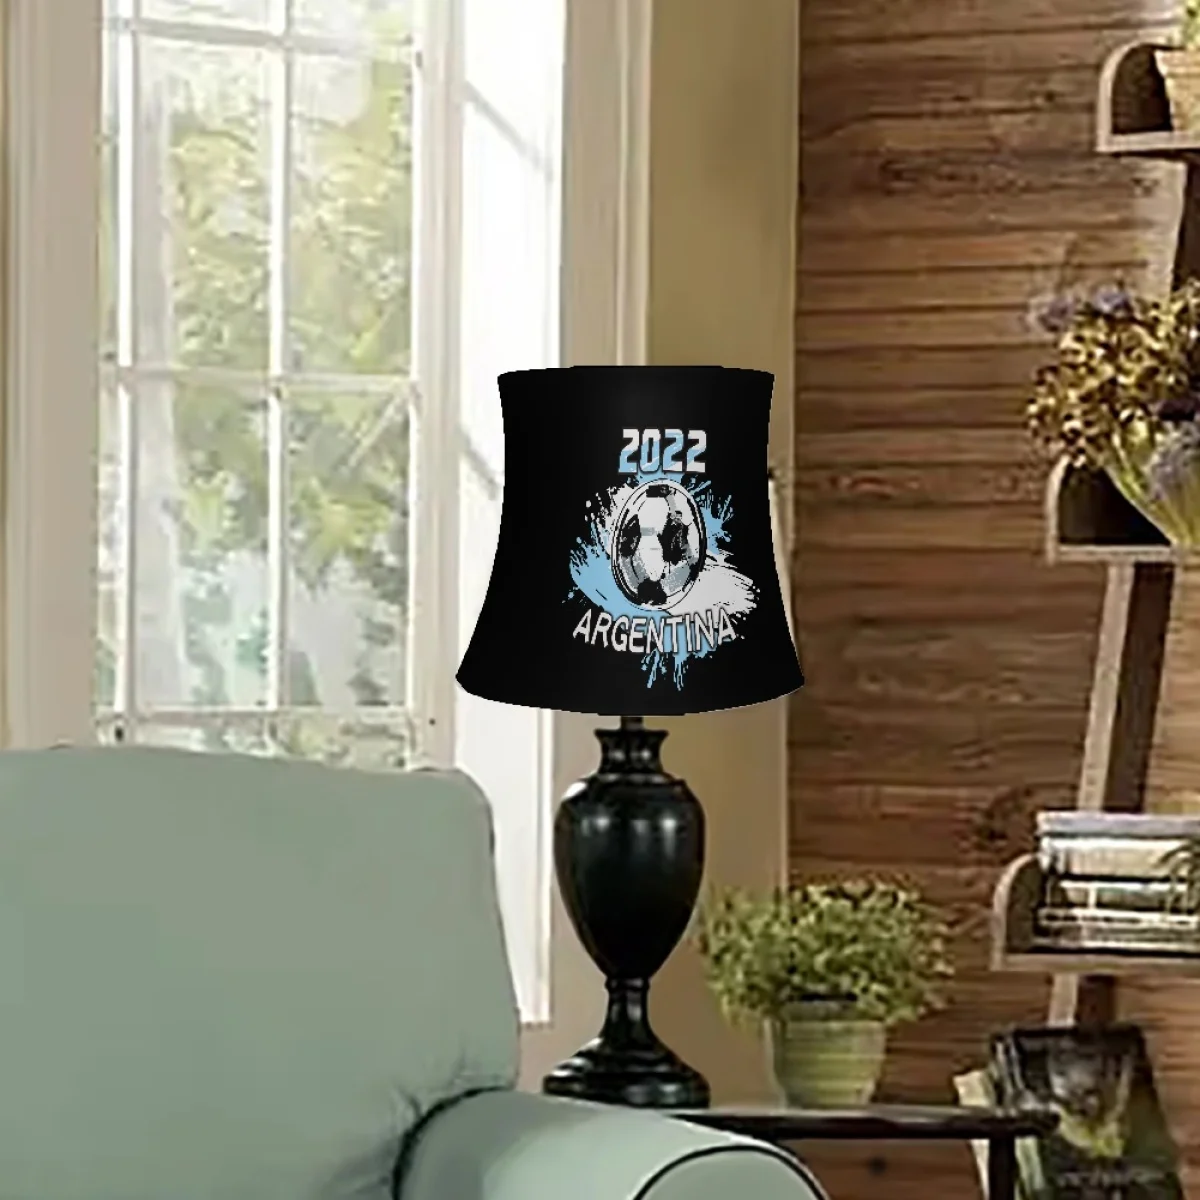 Customized Lampshade Frames Wholesale 2022 Football Match Fabric Lampshade Print On Demand Lampshades Table/Floor Lamp Shade